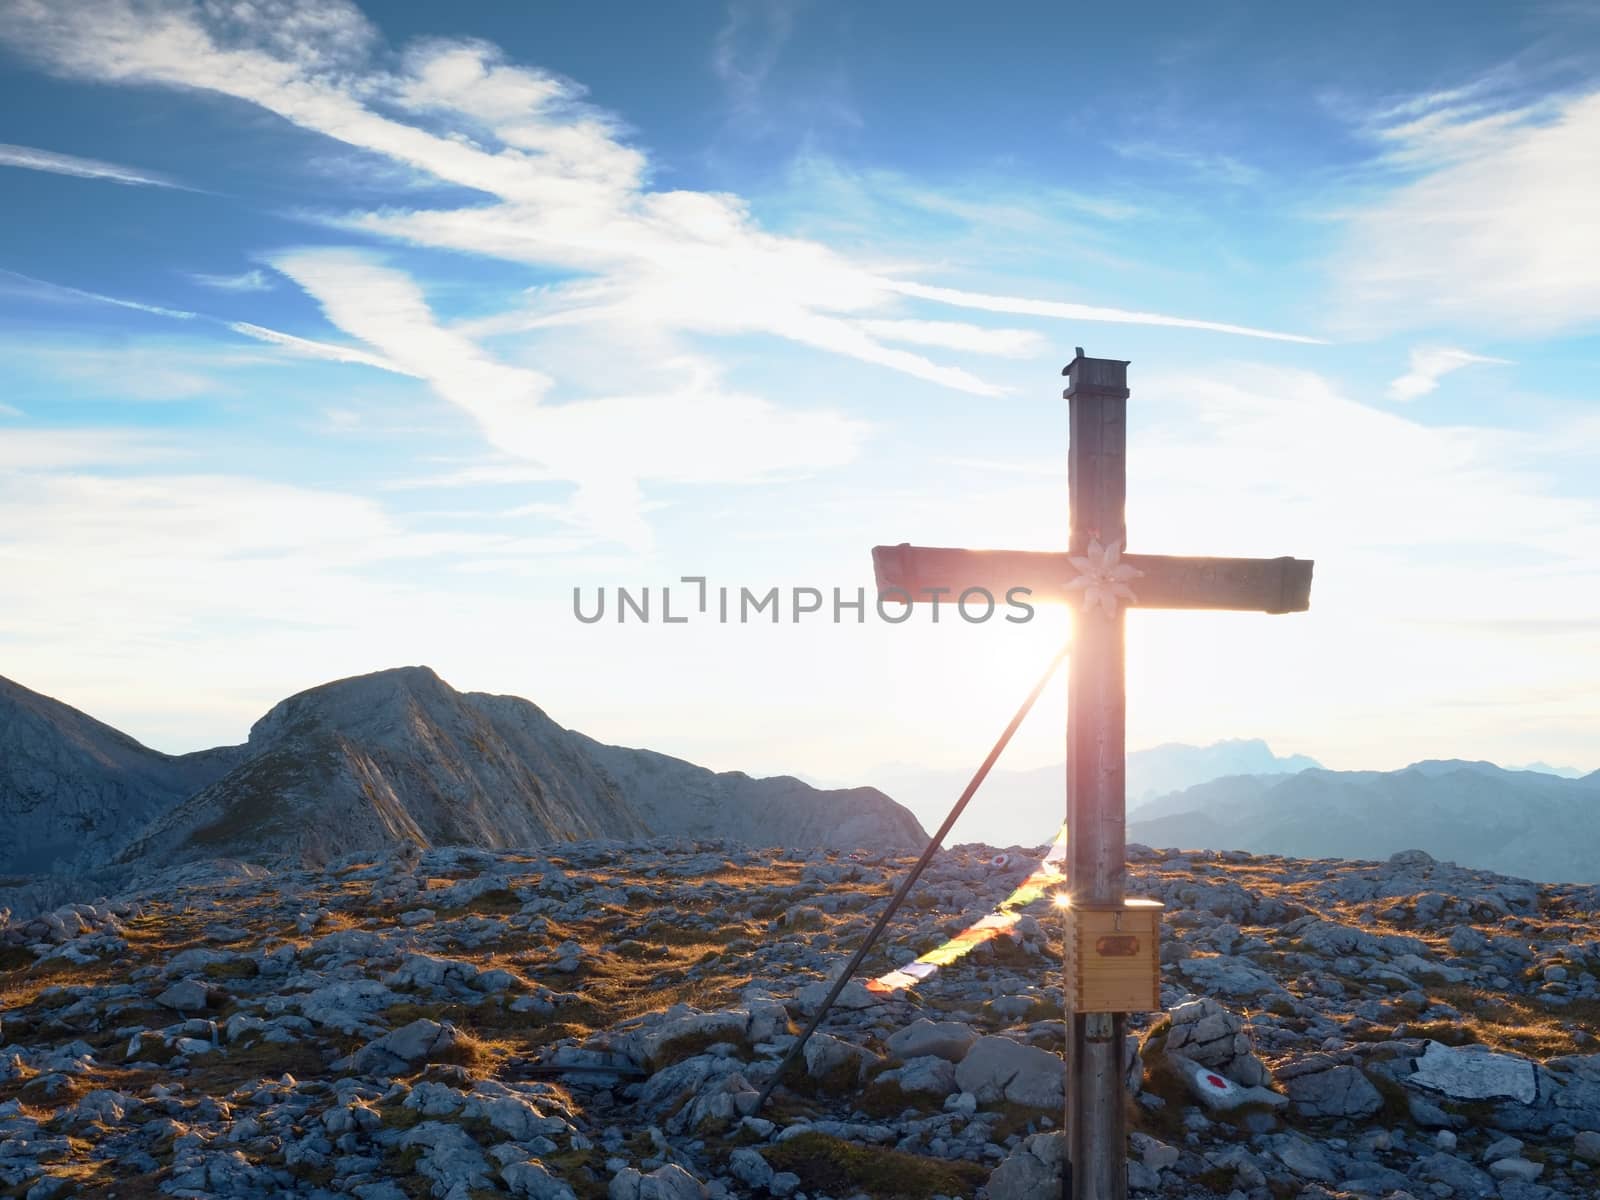 Modest wooden cross  with Buddhist praying flags, raised on rocky Alpine mountain summit . Sharp rocky peak. Gentle clouds  in blue sky. Wooden unpretentious crucifix in memory of victims of mountains.